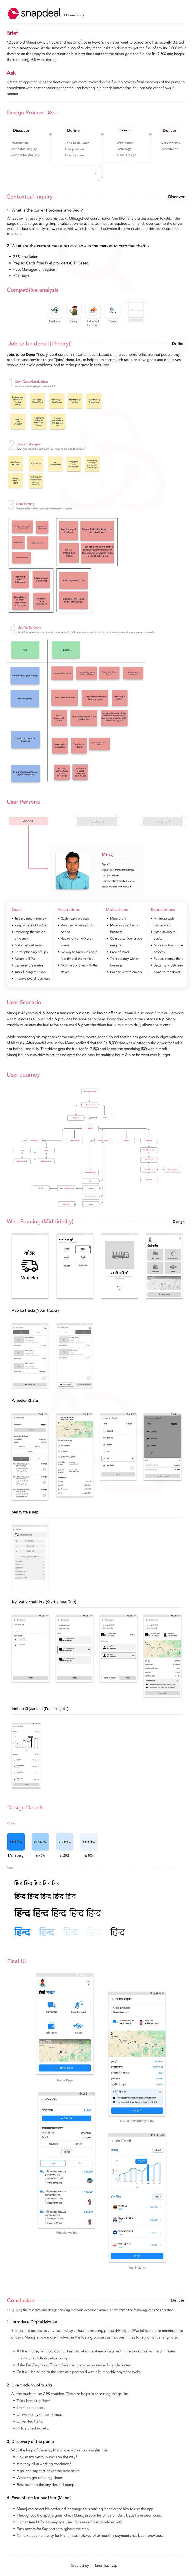 Figma UI/UX research experience design product design User Experience Design